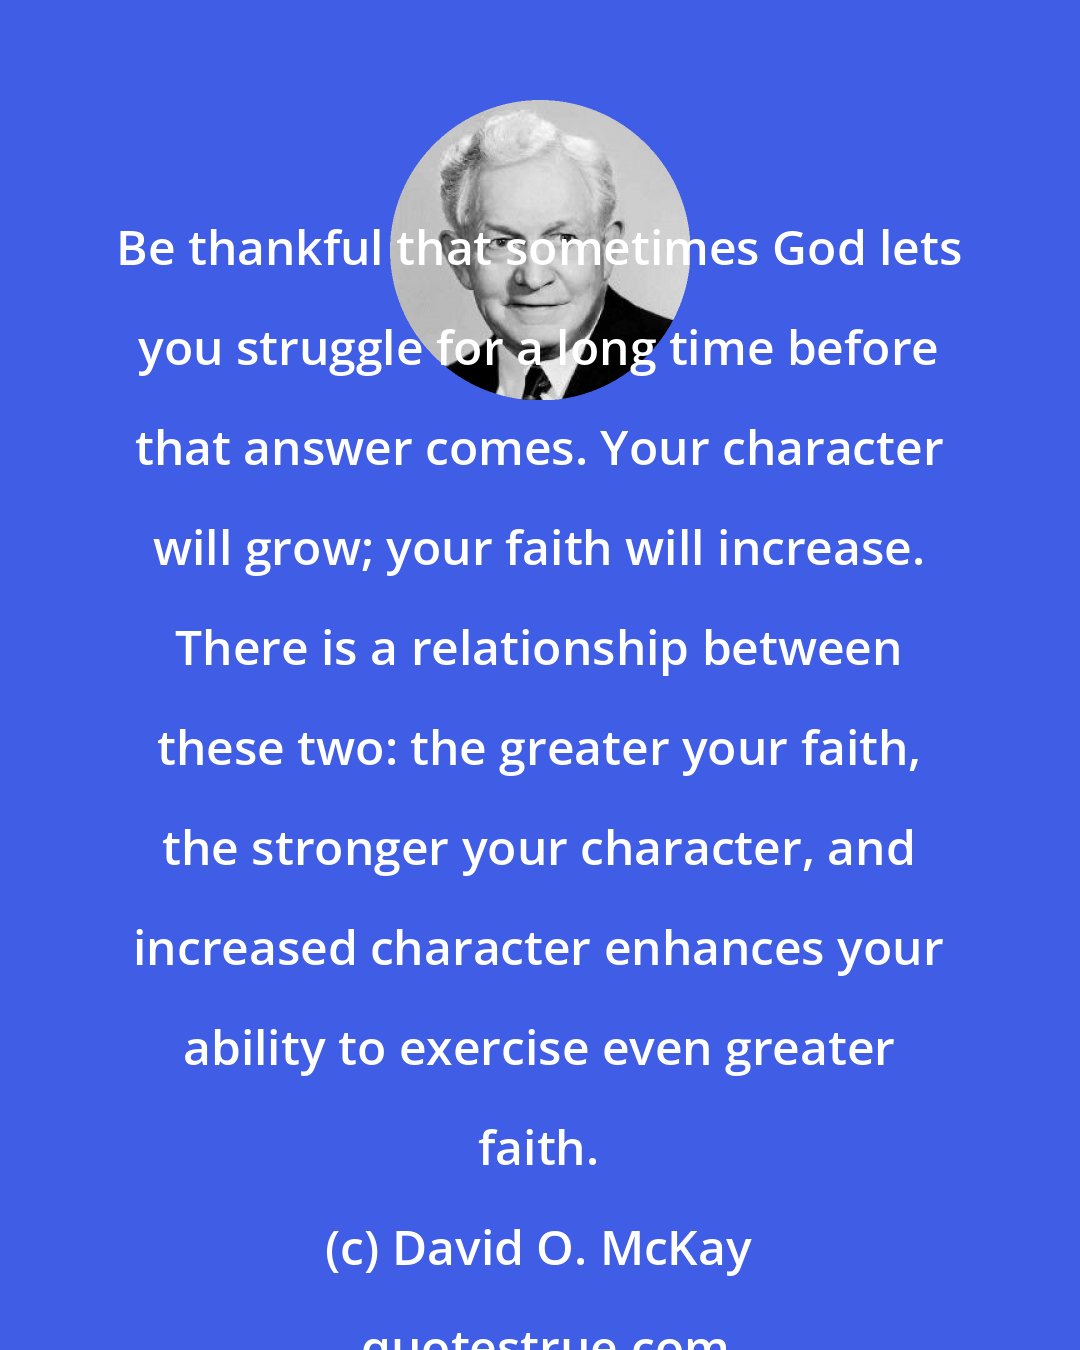 David O. McKay: Be thankful that sometimes God lets you struggle for a long time before that answer comes. Your character will grow; your faith will increase. There is a relationship between these two: the greater your faith, the stronger your character, and increased character enhances your ability to exercise even greater faith.